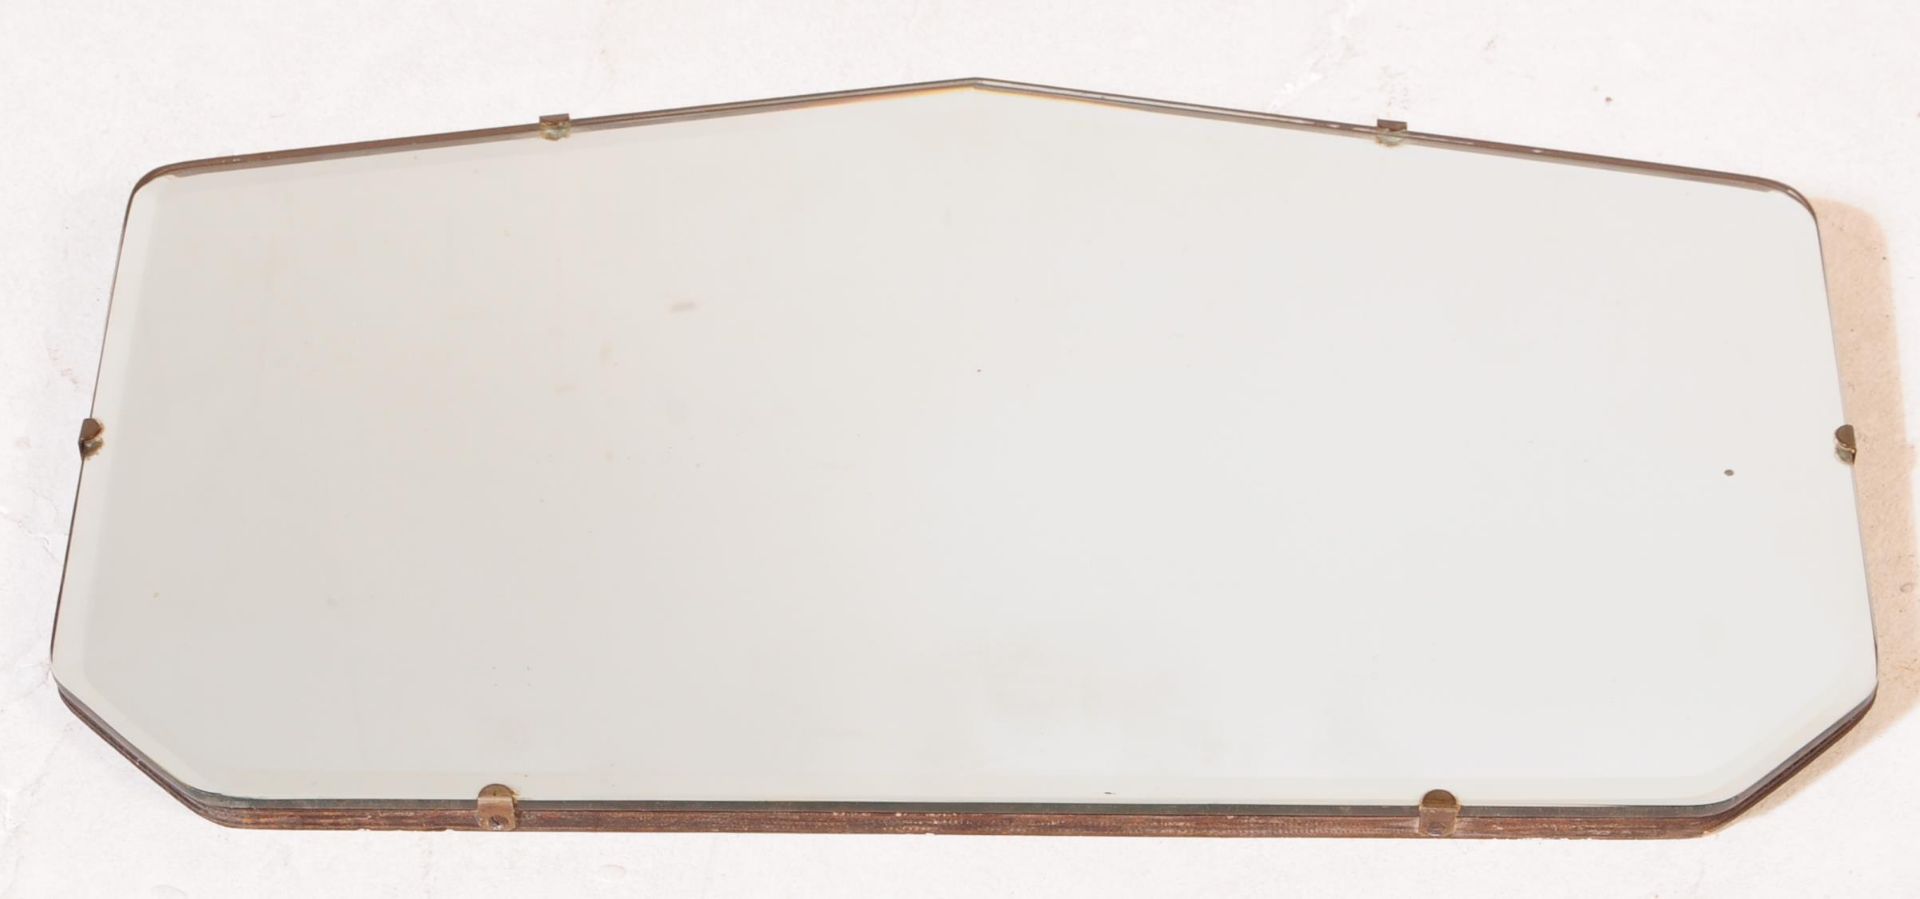 A VINTAGE 20TH CENTURY WALL HANGING MIRROR - Image 3 of 5